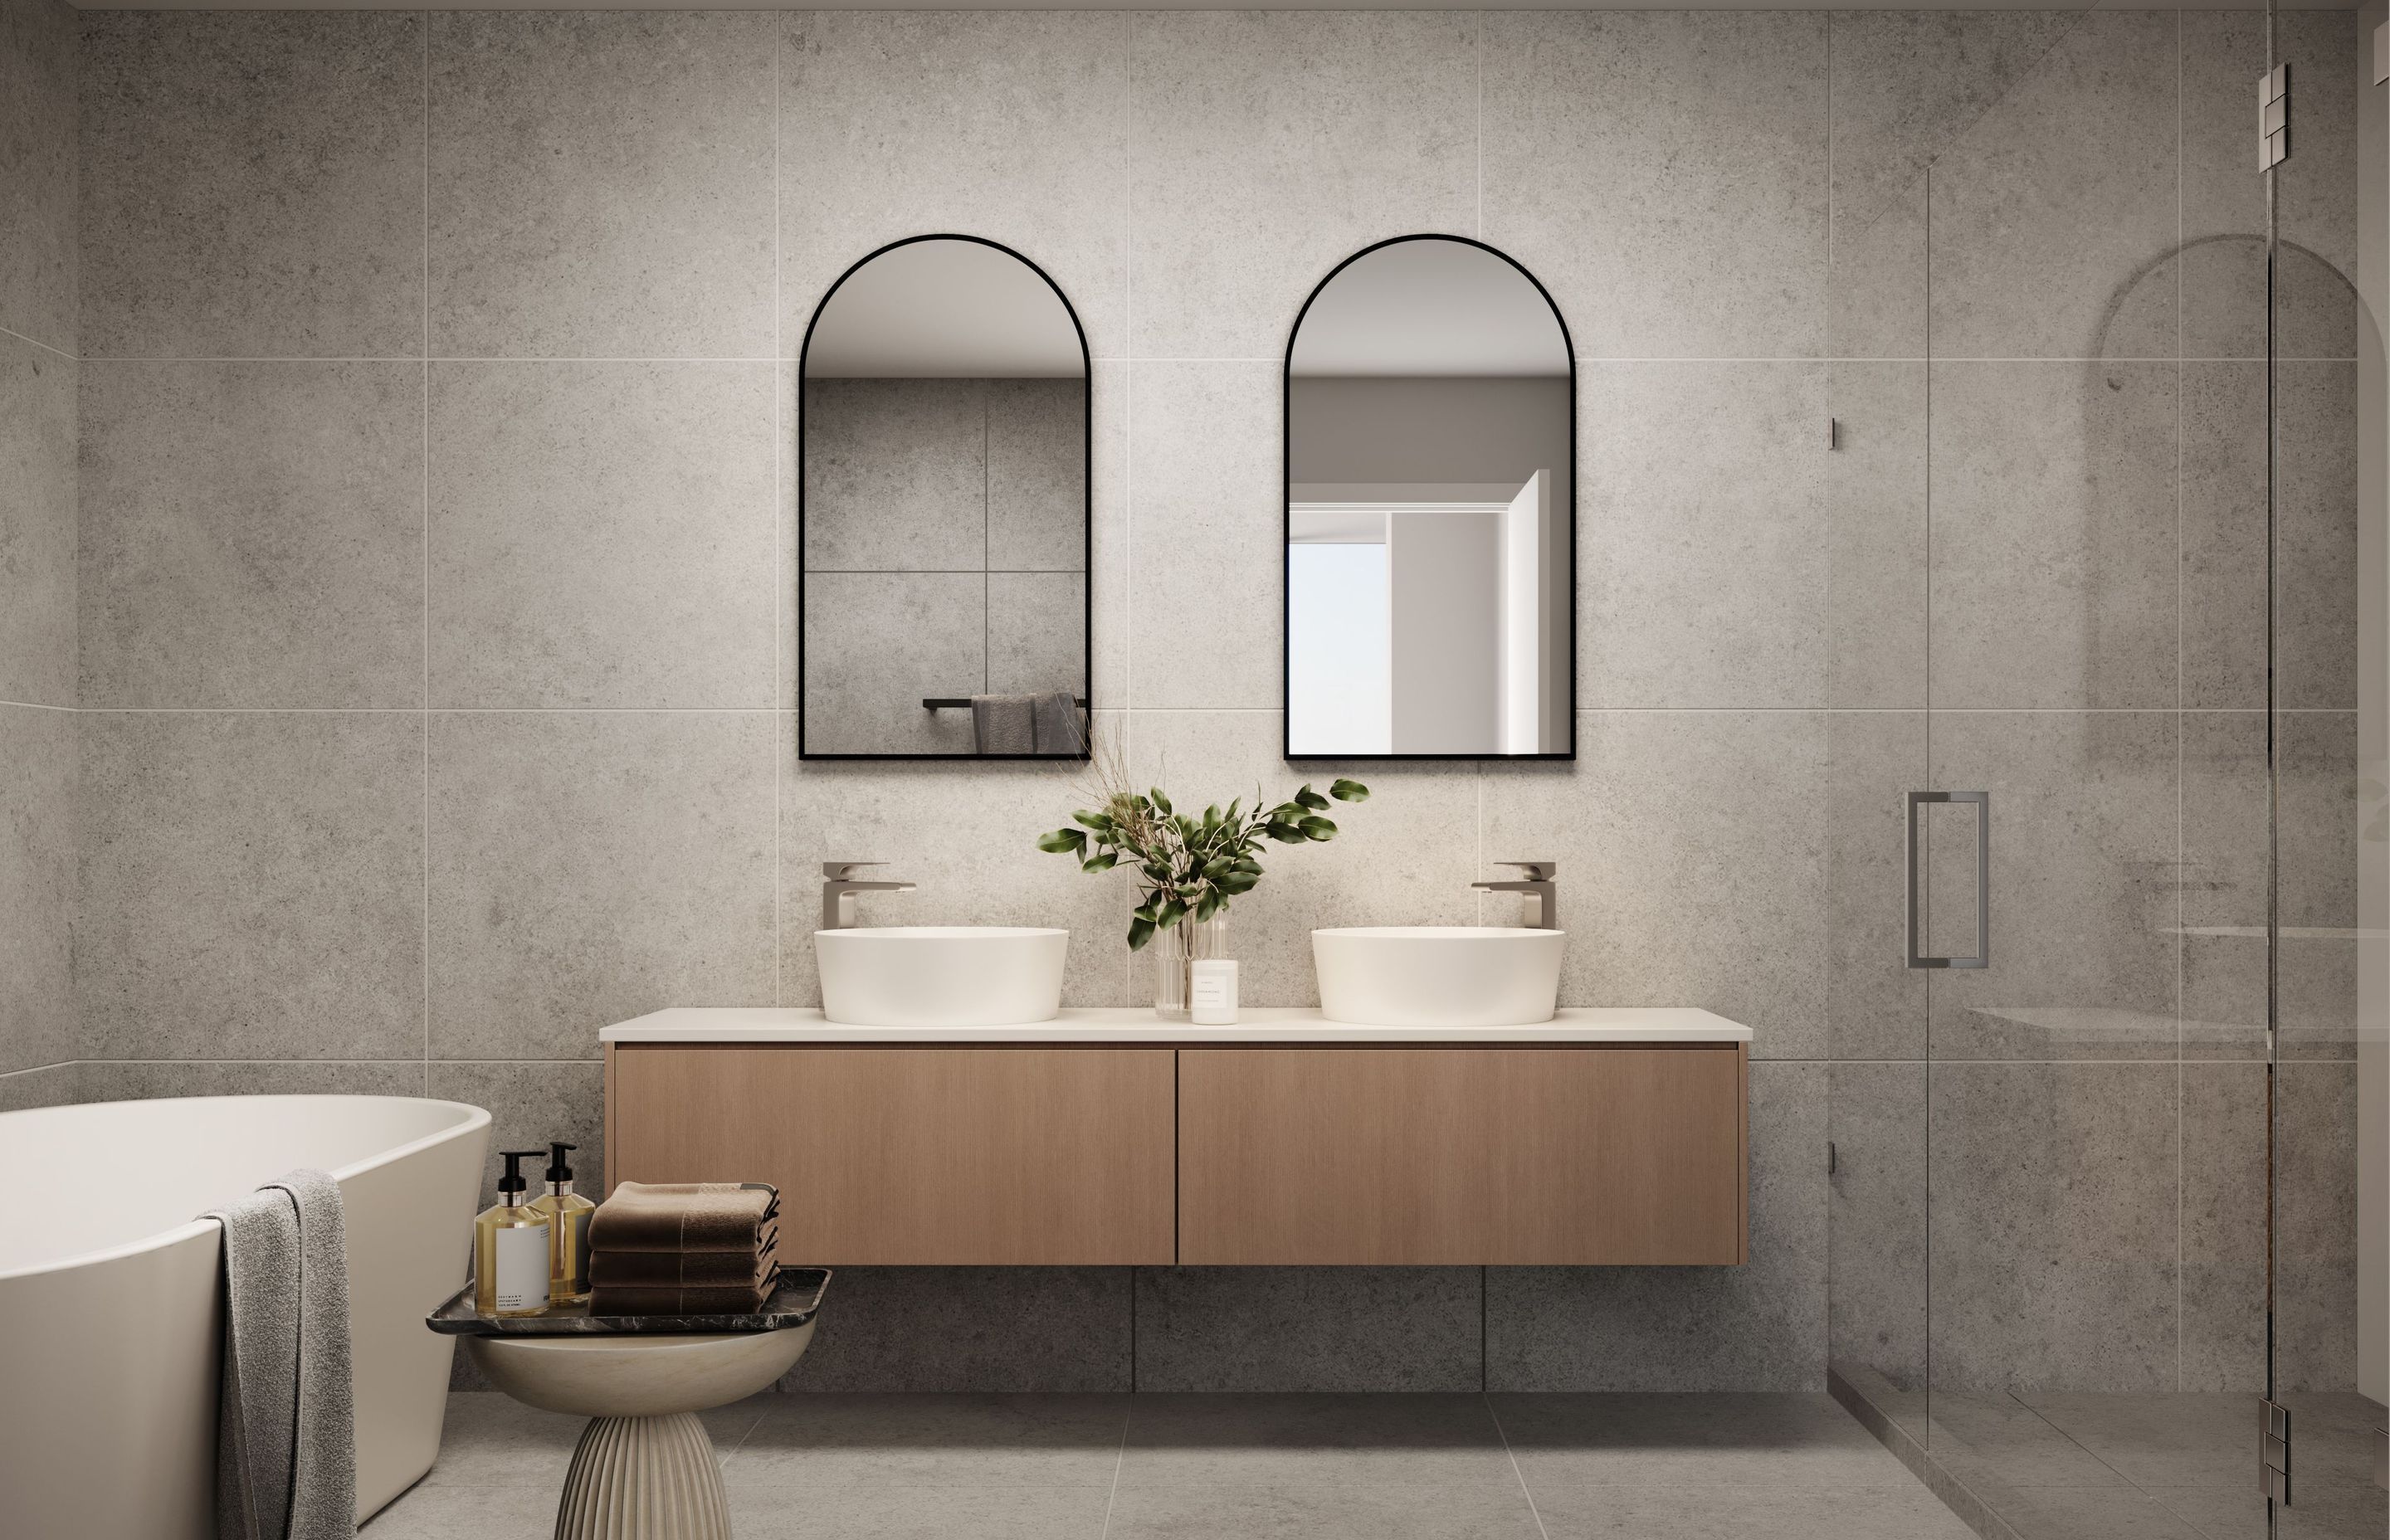 Hyde Lane’s penthouse bathroom interior, designed with organic shapes and a natural material scheme.